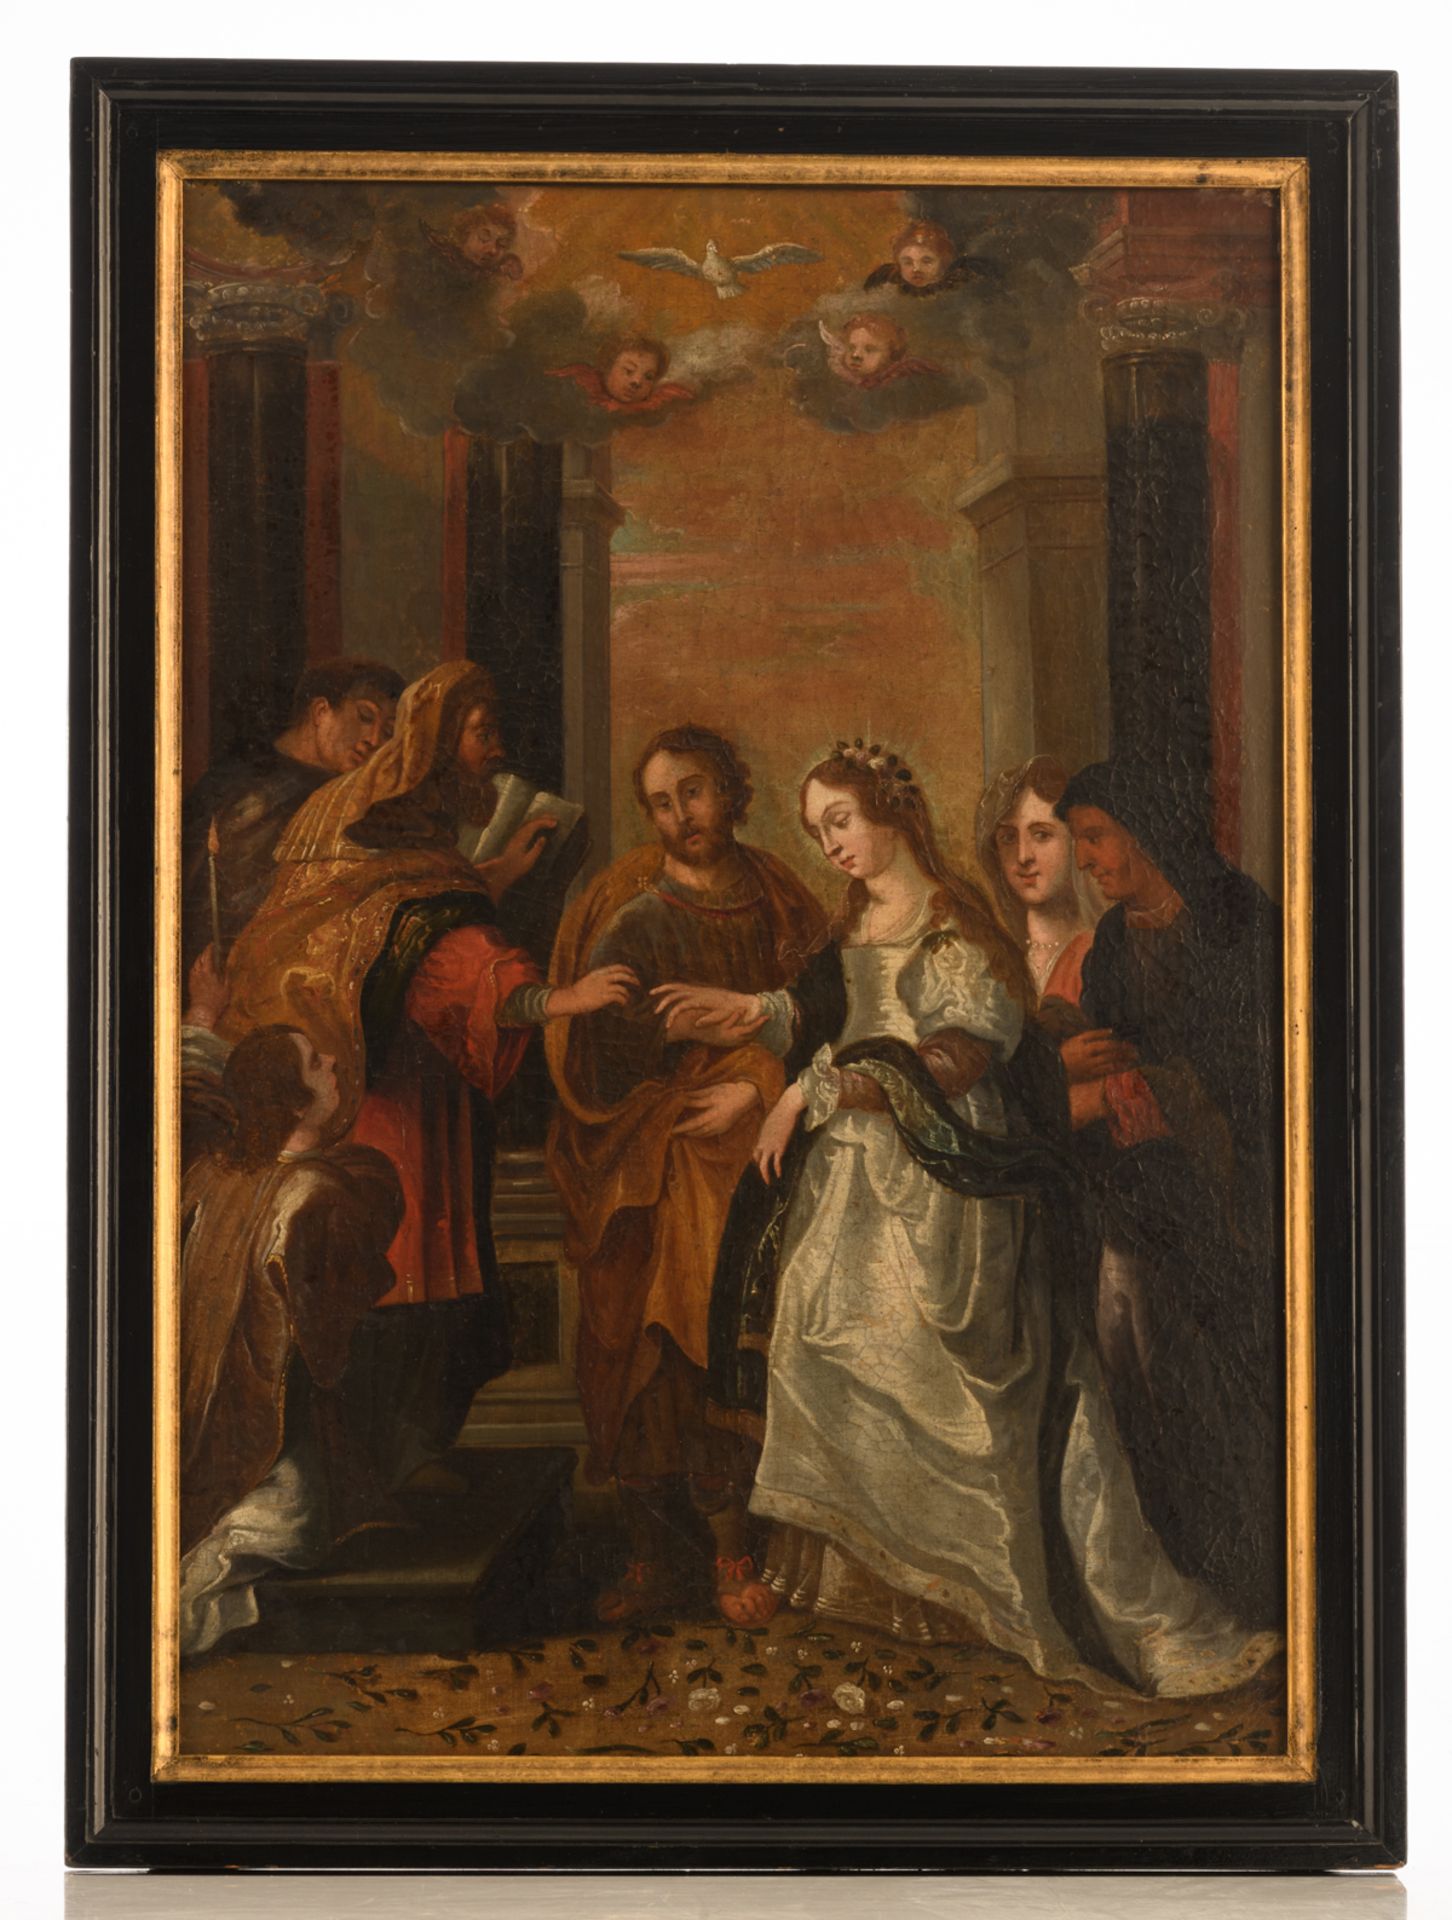 No visible signature, the wedding of the Holy Mary and Saint Joseph, oil on canvas, 17th/18thC, form - Bild 2 aus 3